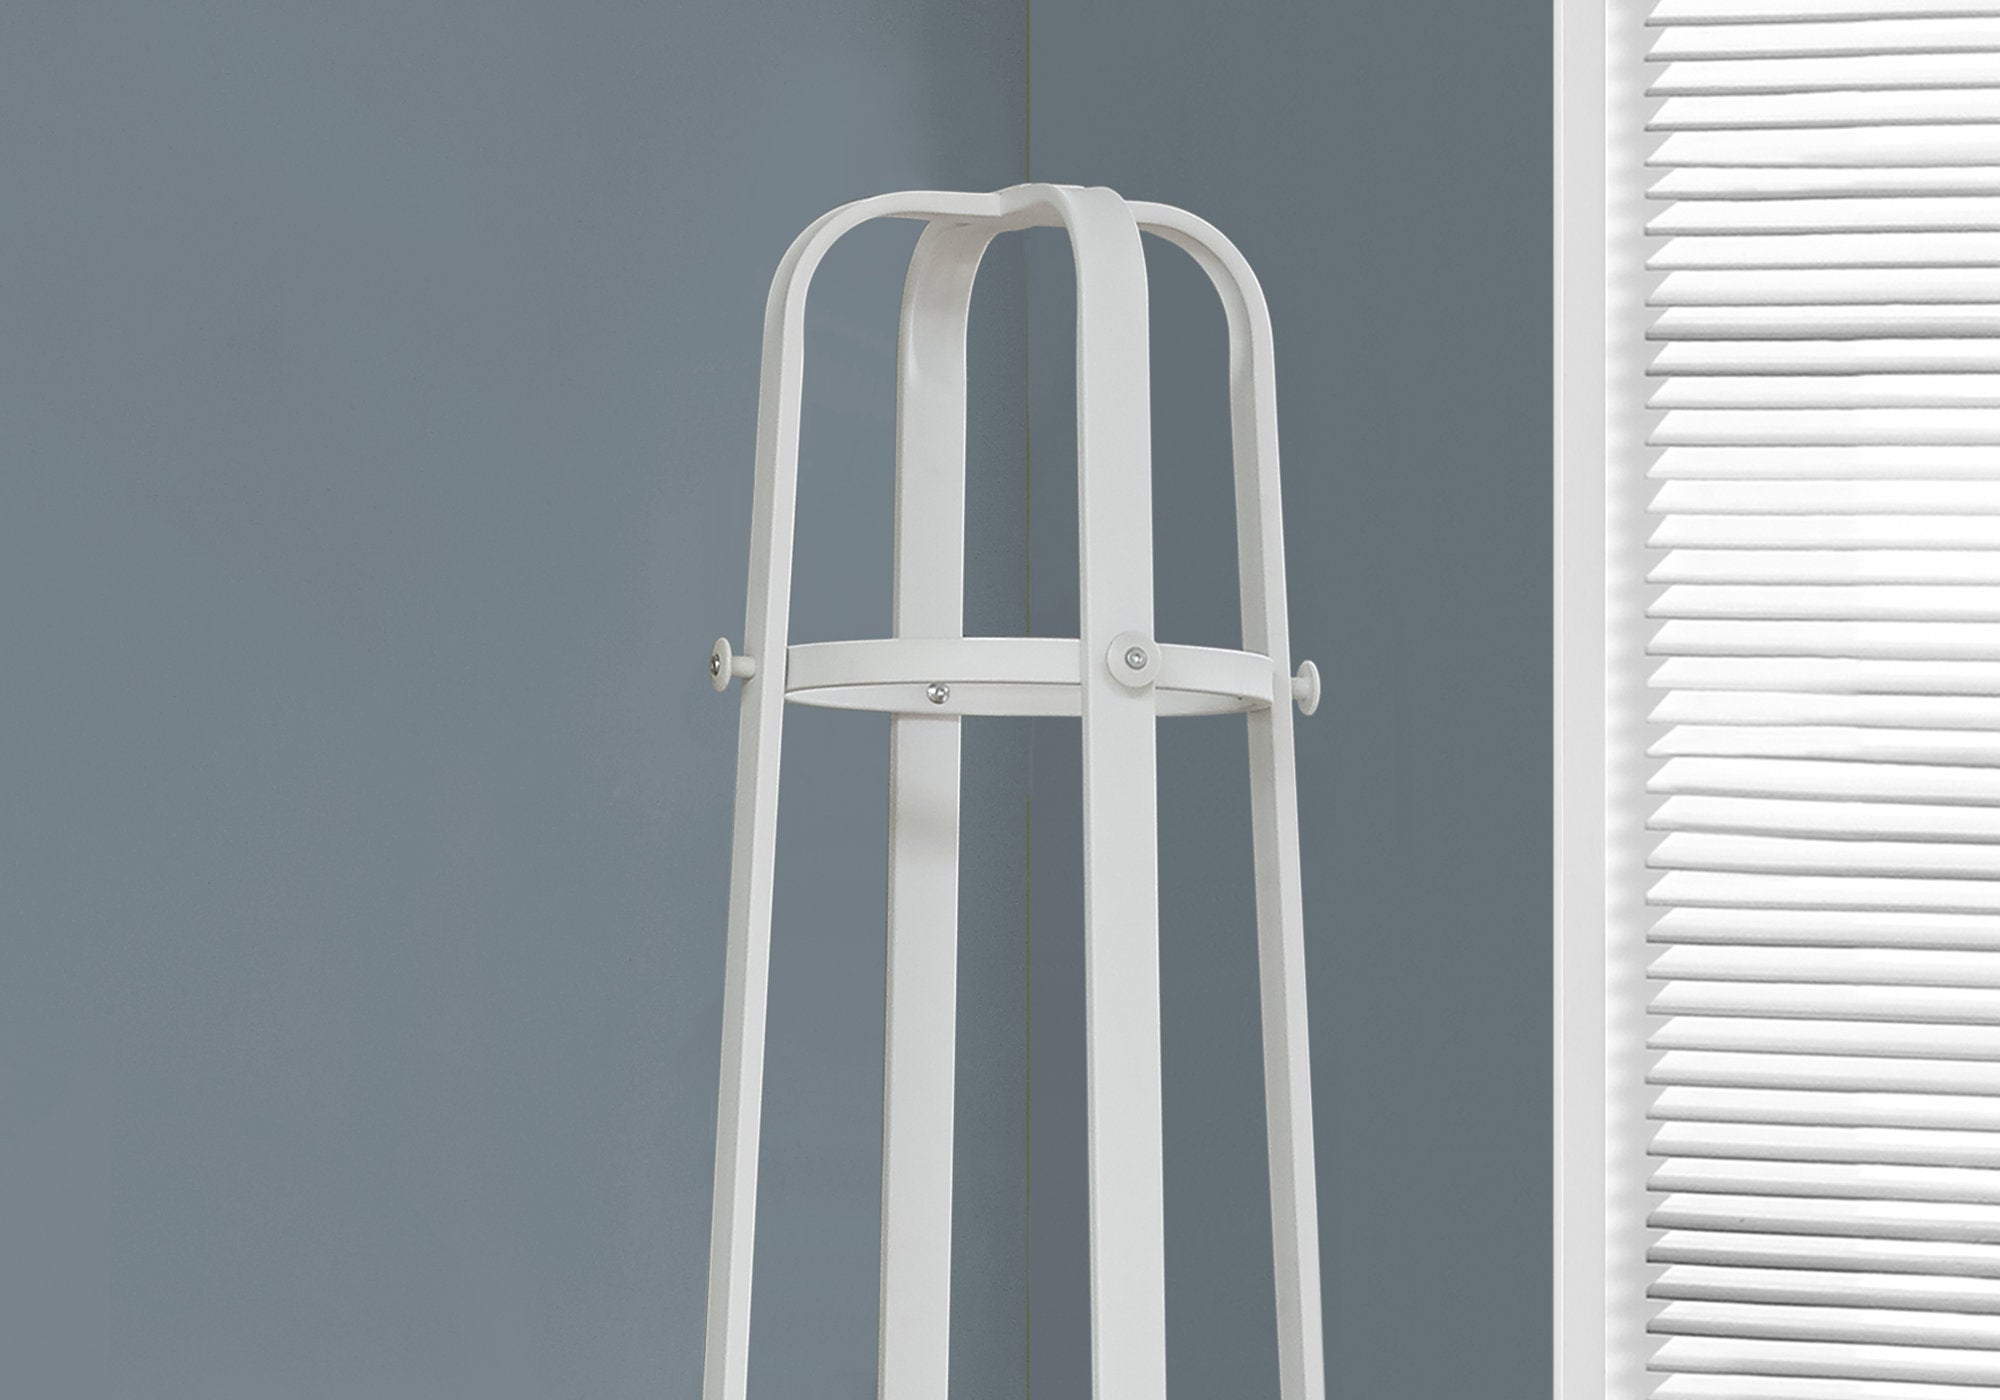 Coat Rack - 72H / White Metal With An Umbrella Holder